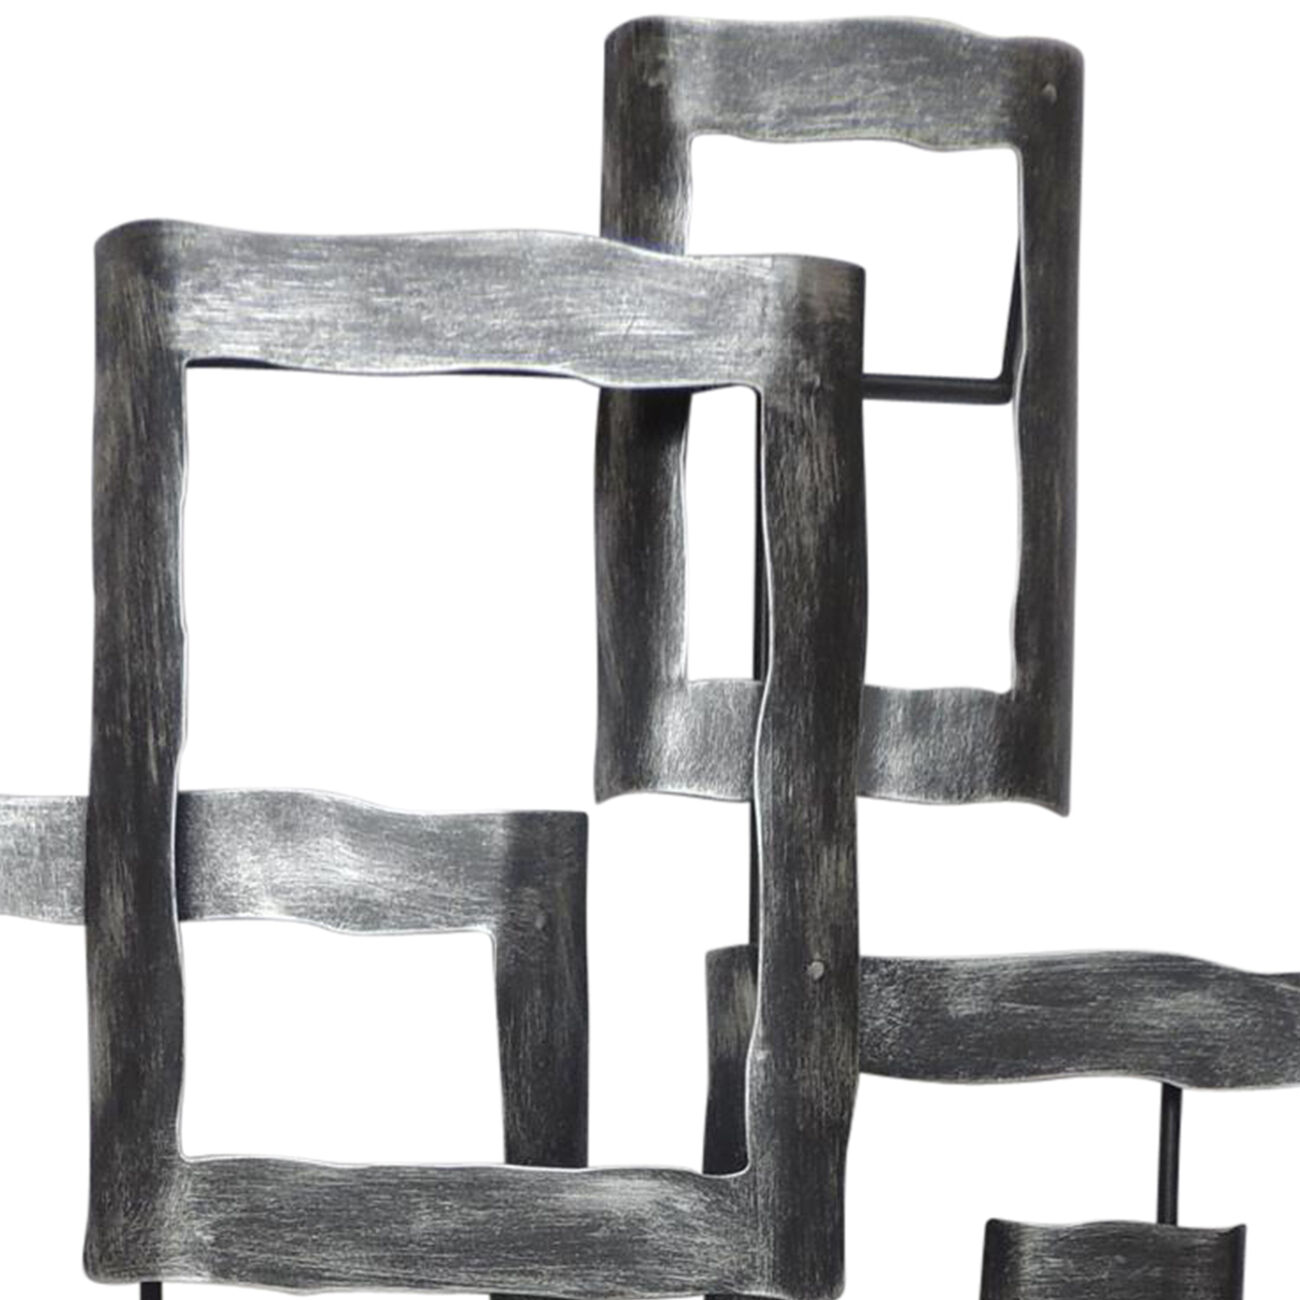 Interconnected Rectangles Hammered Metal Frame Wall Decor, Gray